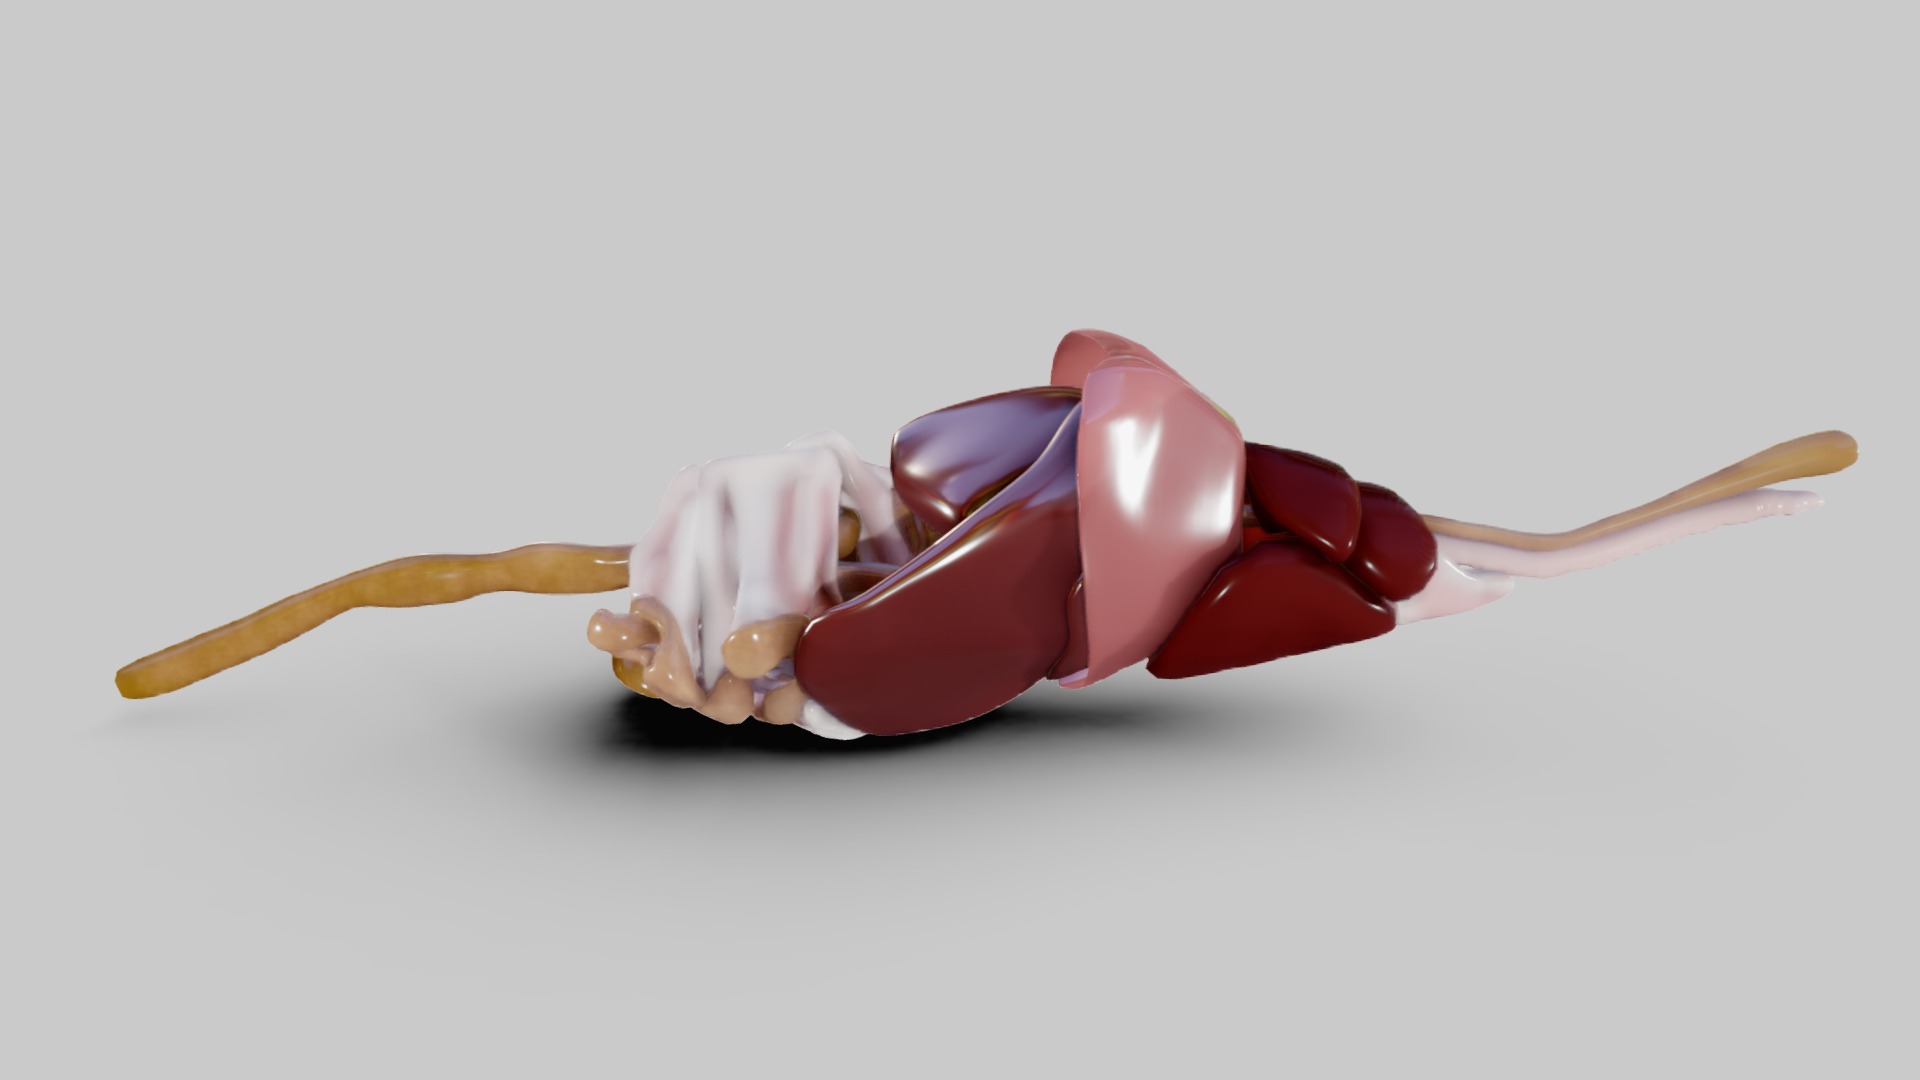 3D model Rat, Intestines - This is a 3D model of the Rat, Intestines. The 3D model is about a pink and white toy.